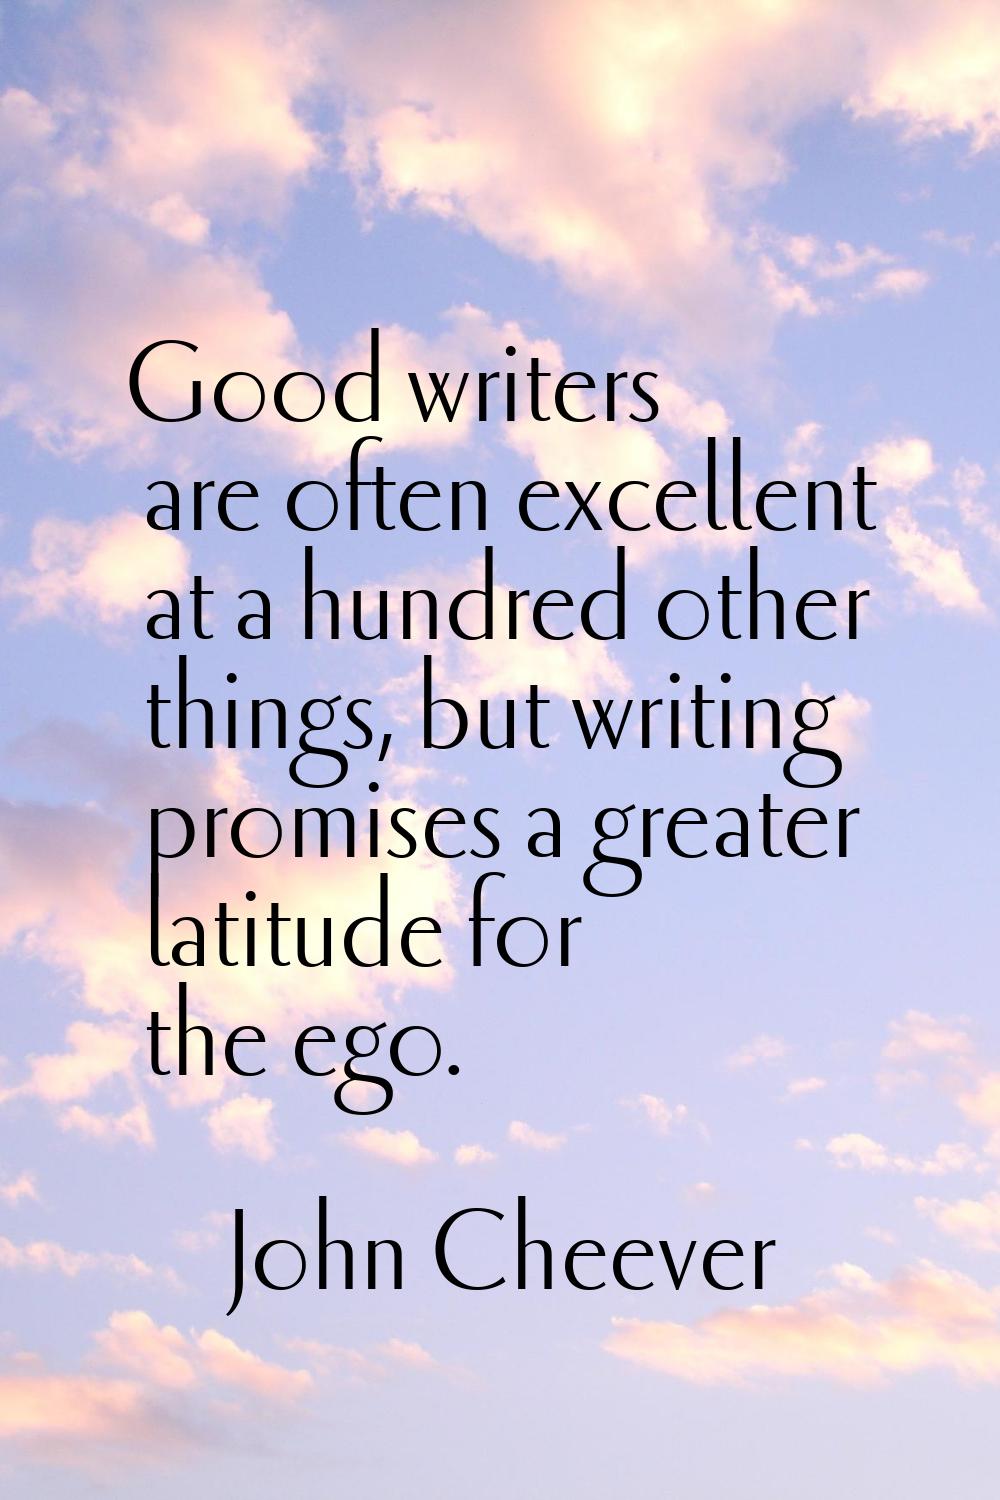 Good writers are often excellent at a hundred other things, but writing promises a greater latitude